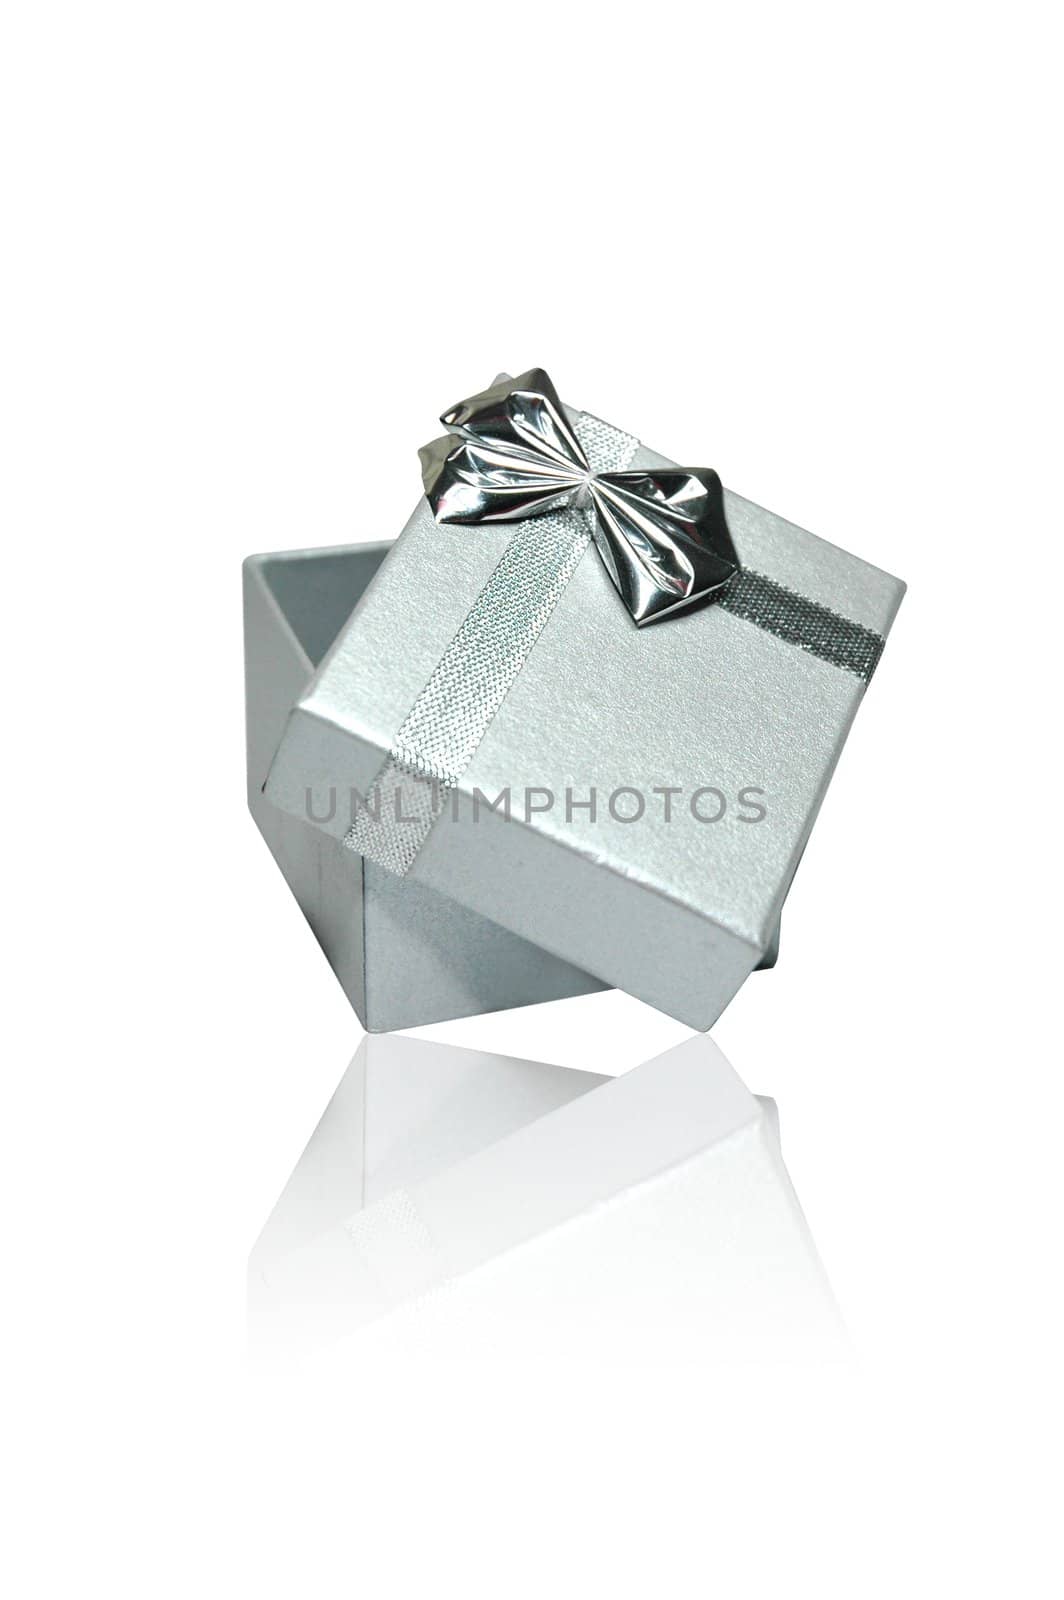 Silver gift box with bow with clipping path